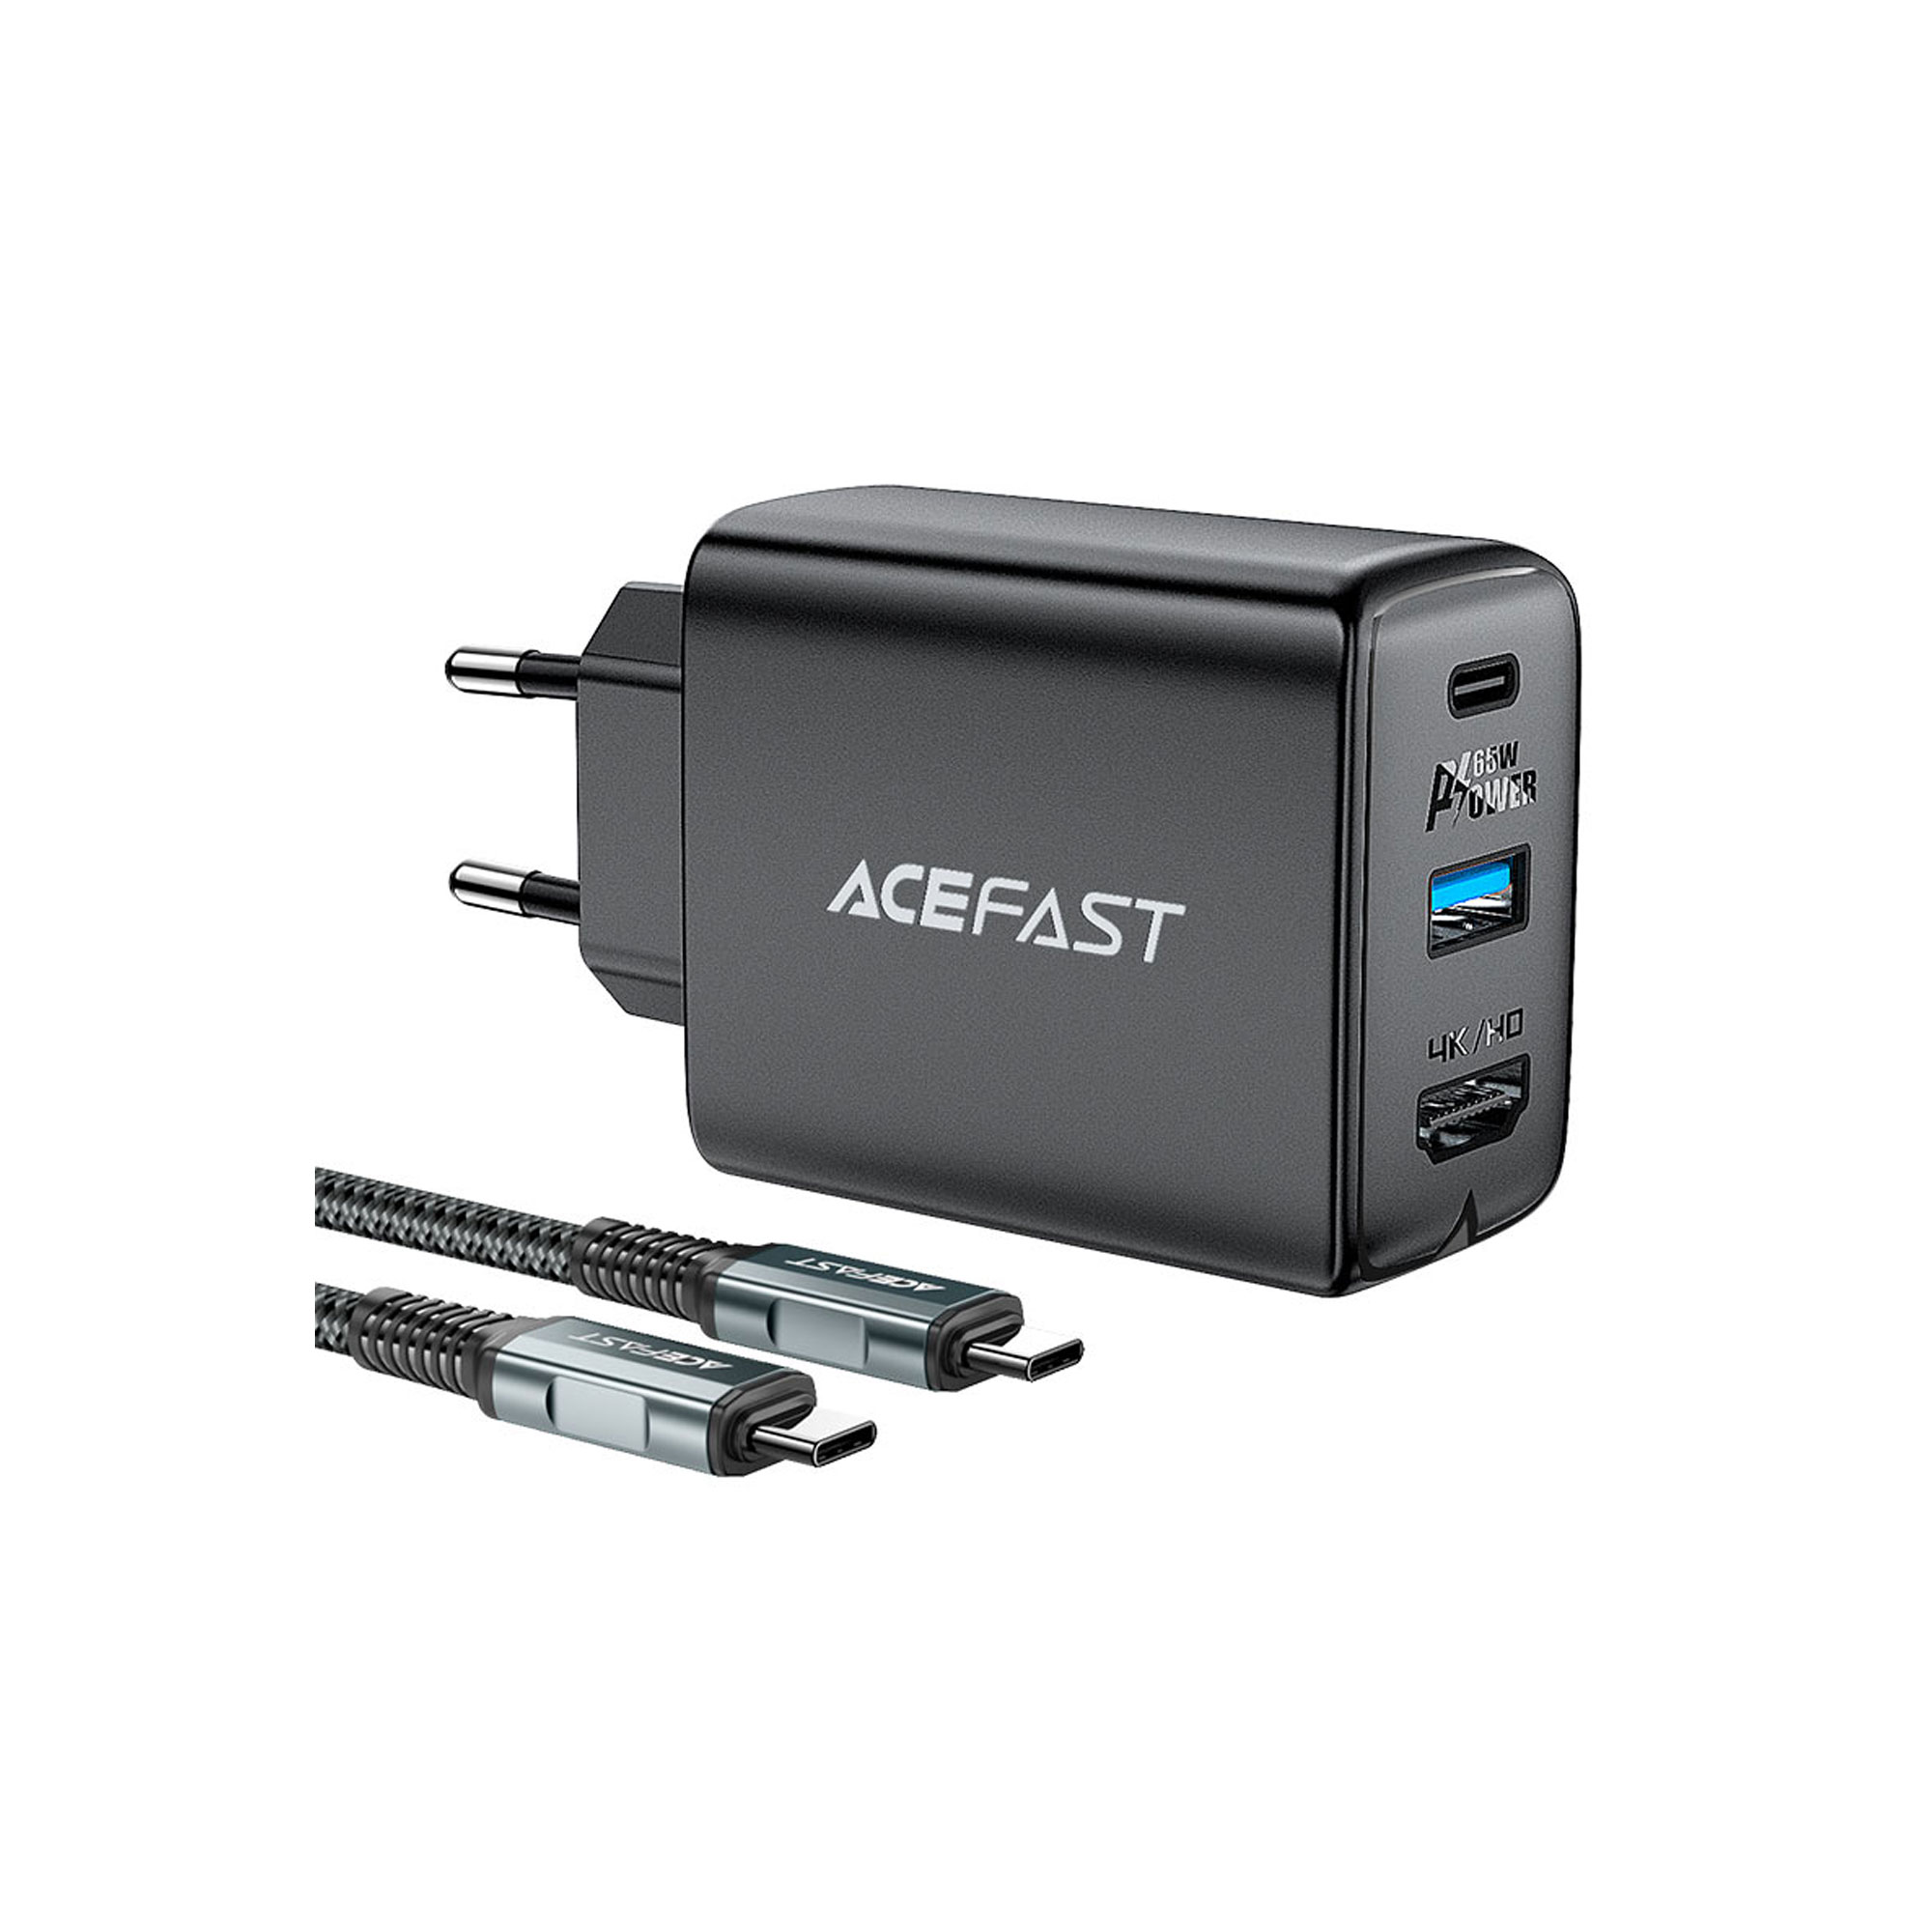 ACEFAST GaN SMART PD CHARGER-HUB charger  set A17 65w